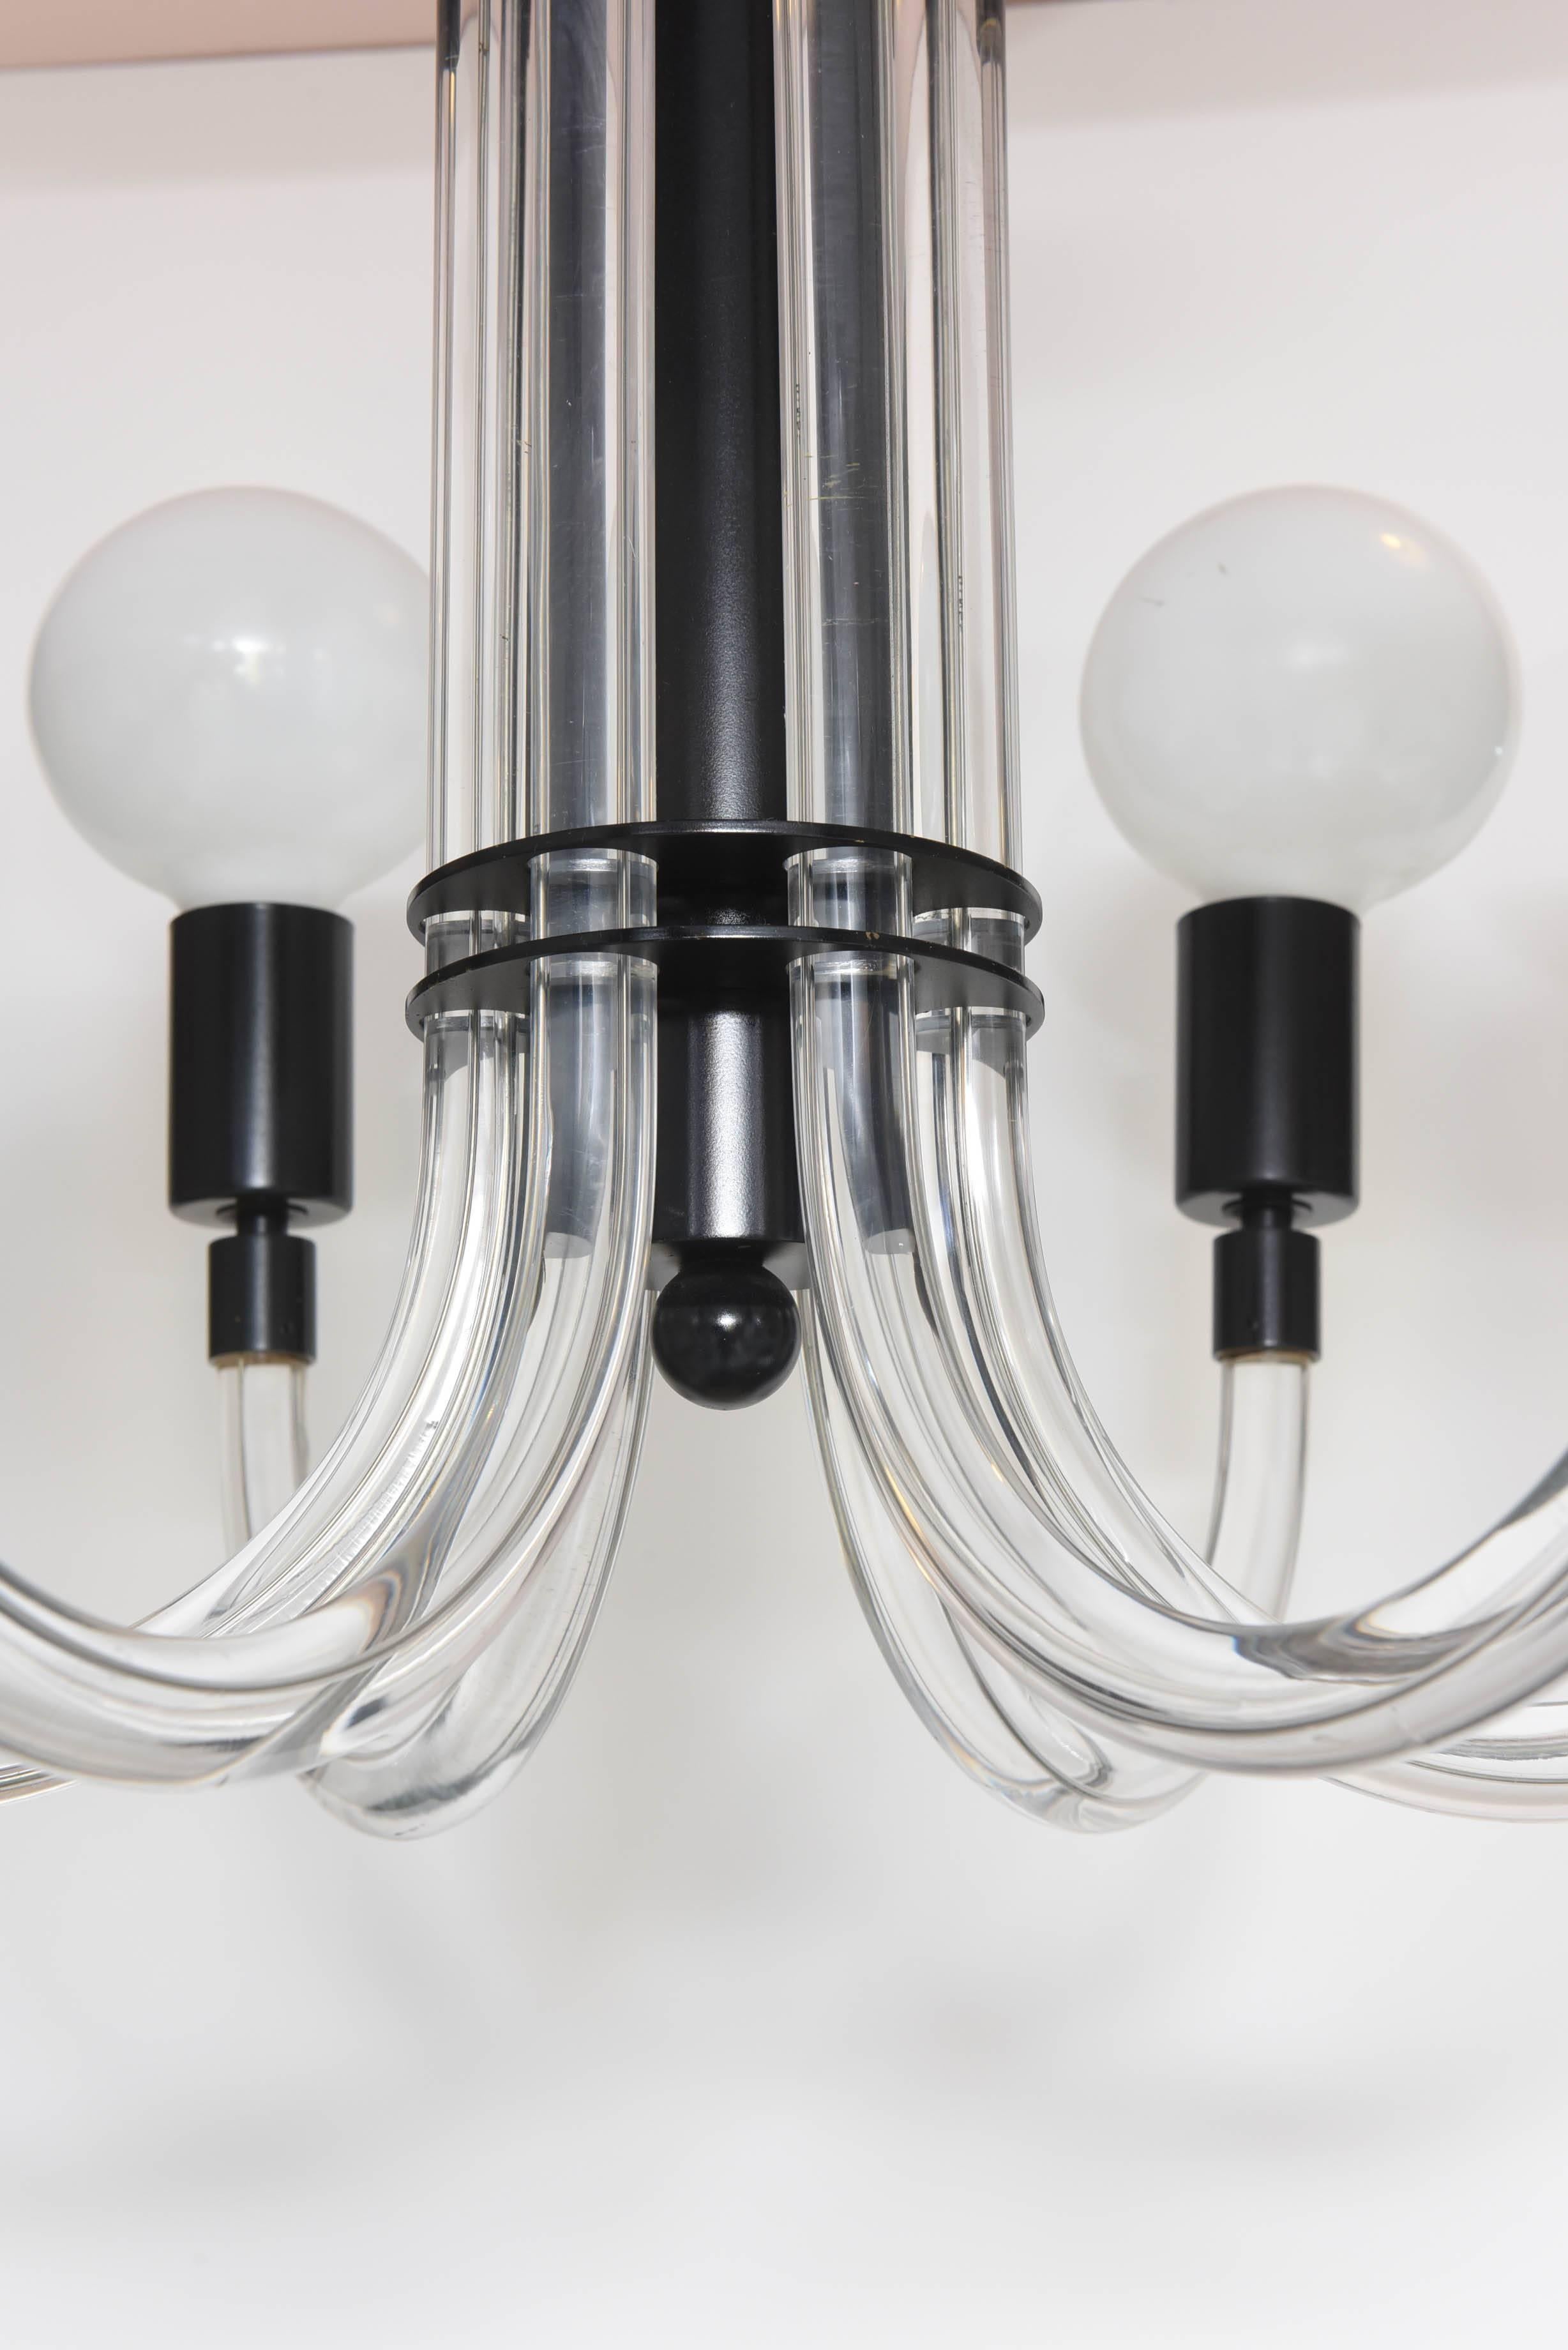 SALE SALE11LUCITE CHANDELIER Charles Hollis Jones BLACK, WHITE 6 ARMS from $1800 In Excellent Condition For Sale In Miami, Miami Design District, FL